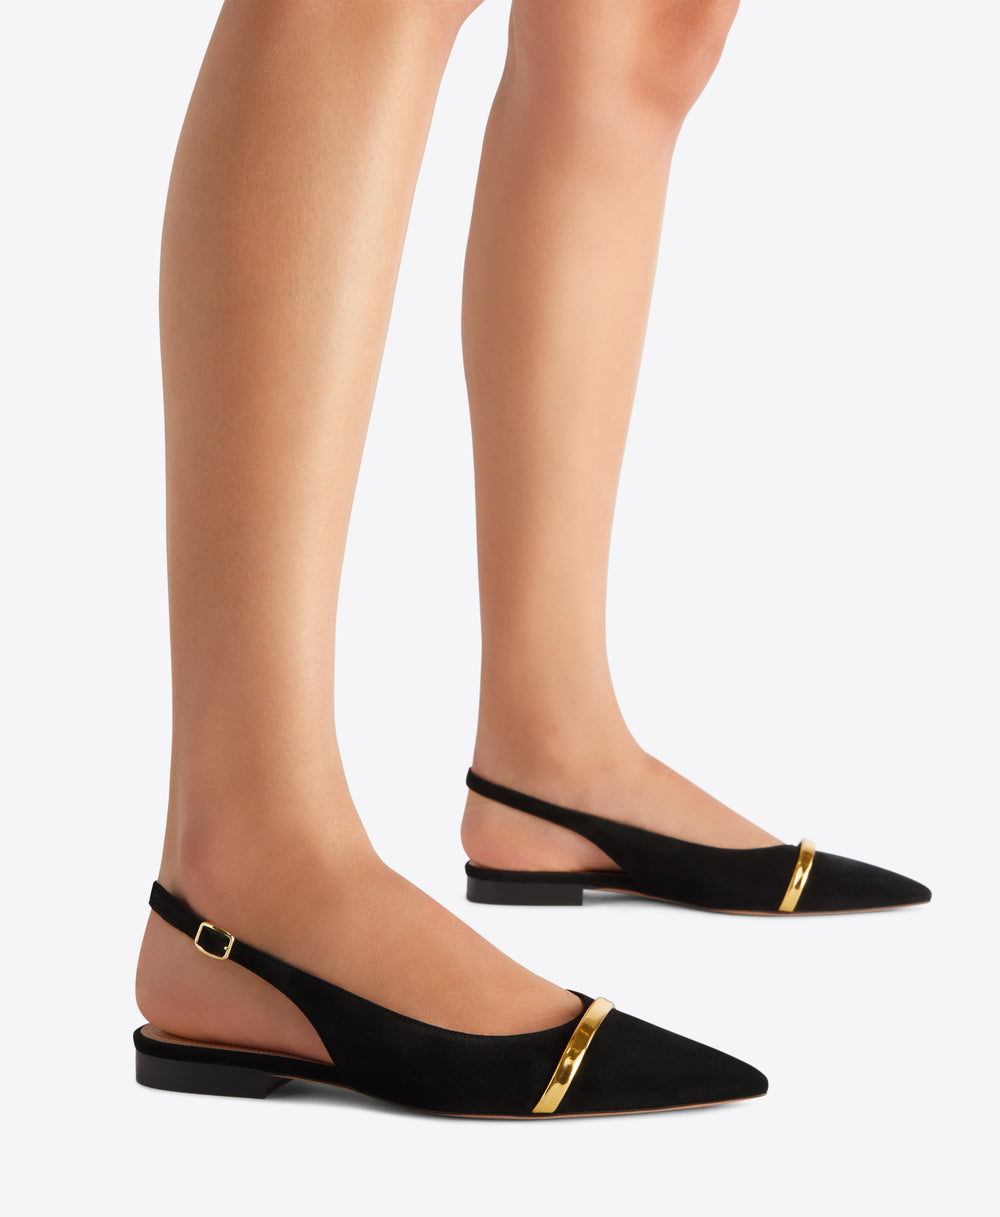 Jama Black Suede Flat Slingbacks with Gold Strap Malone Souliers